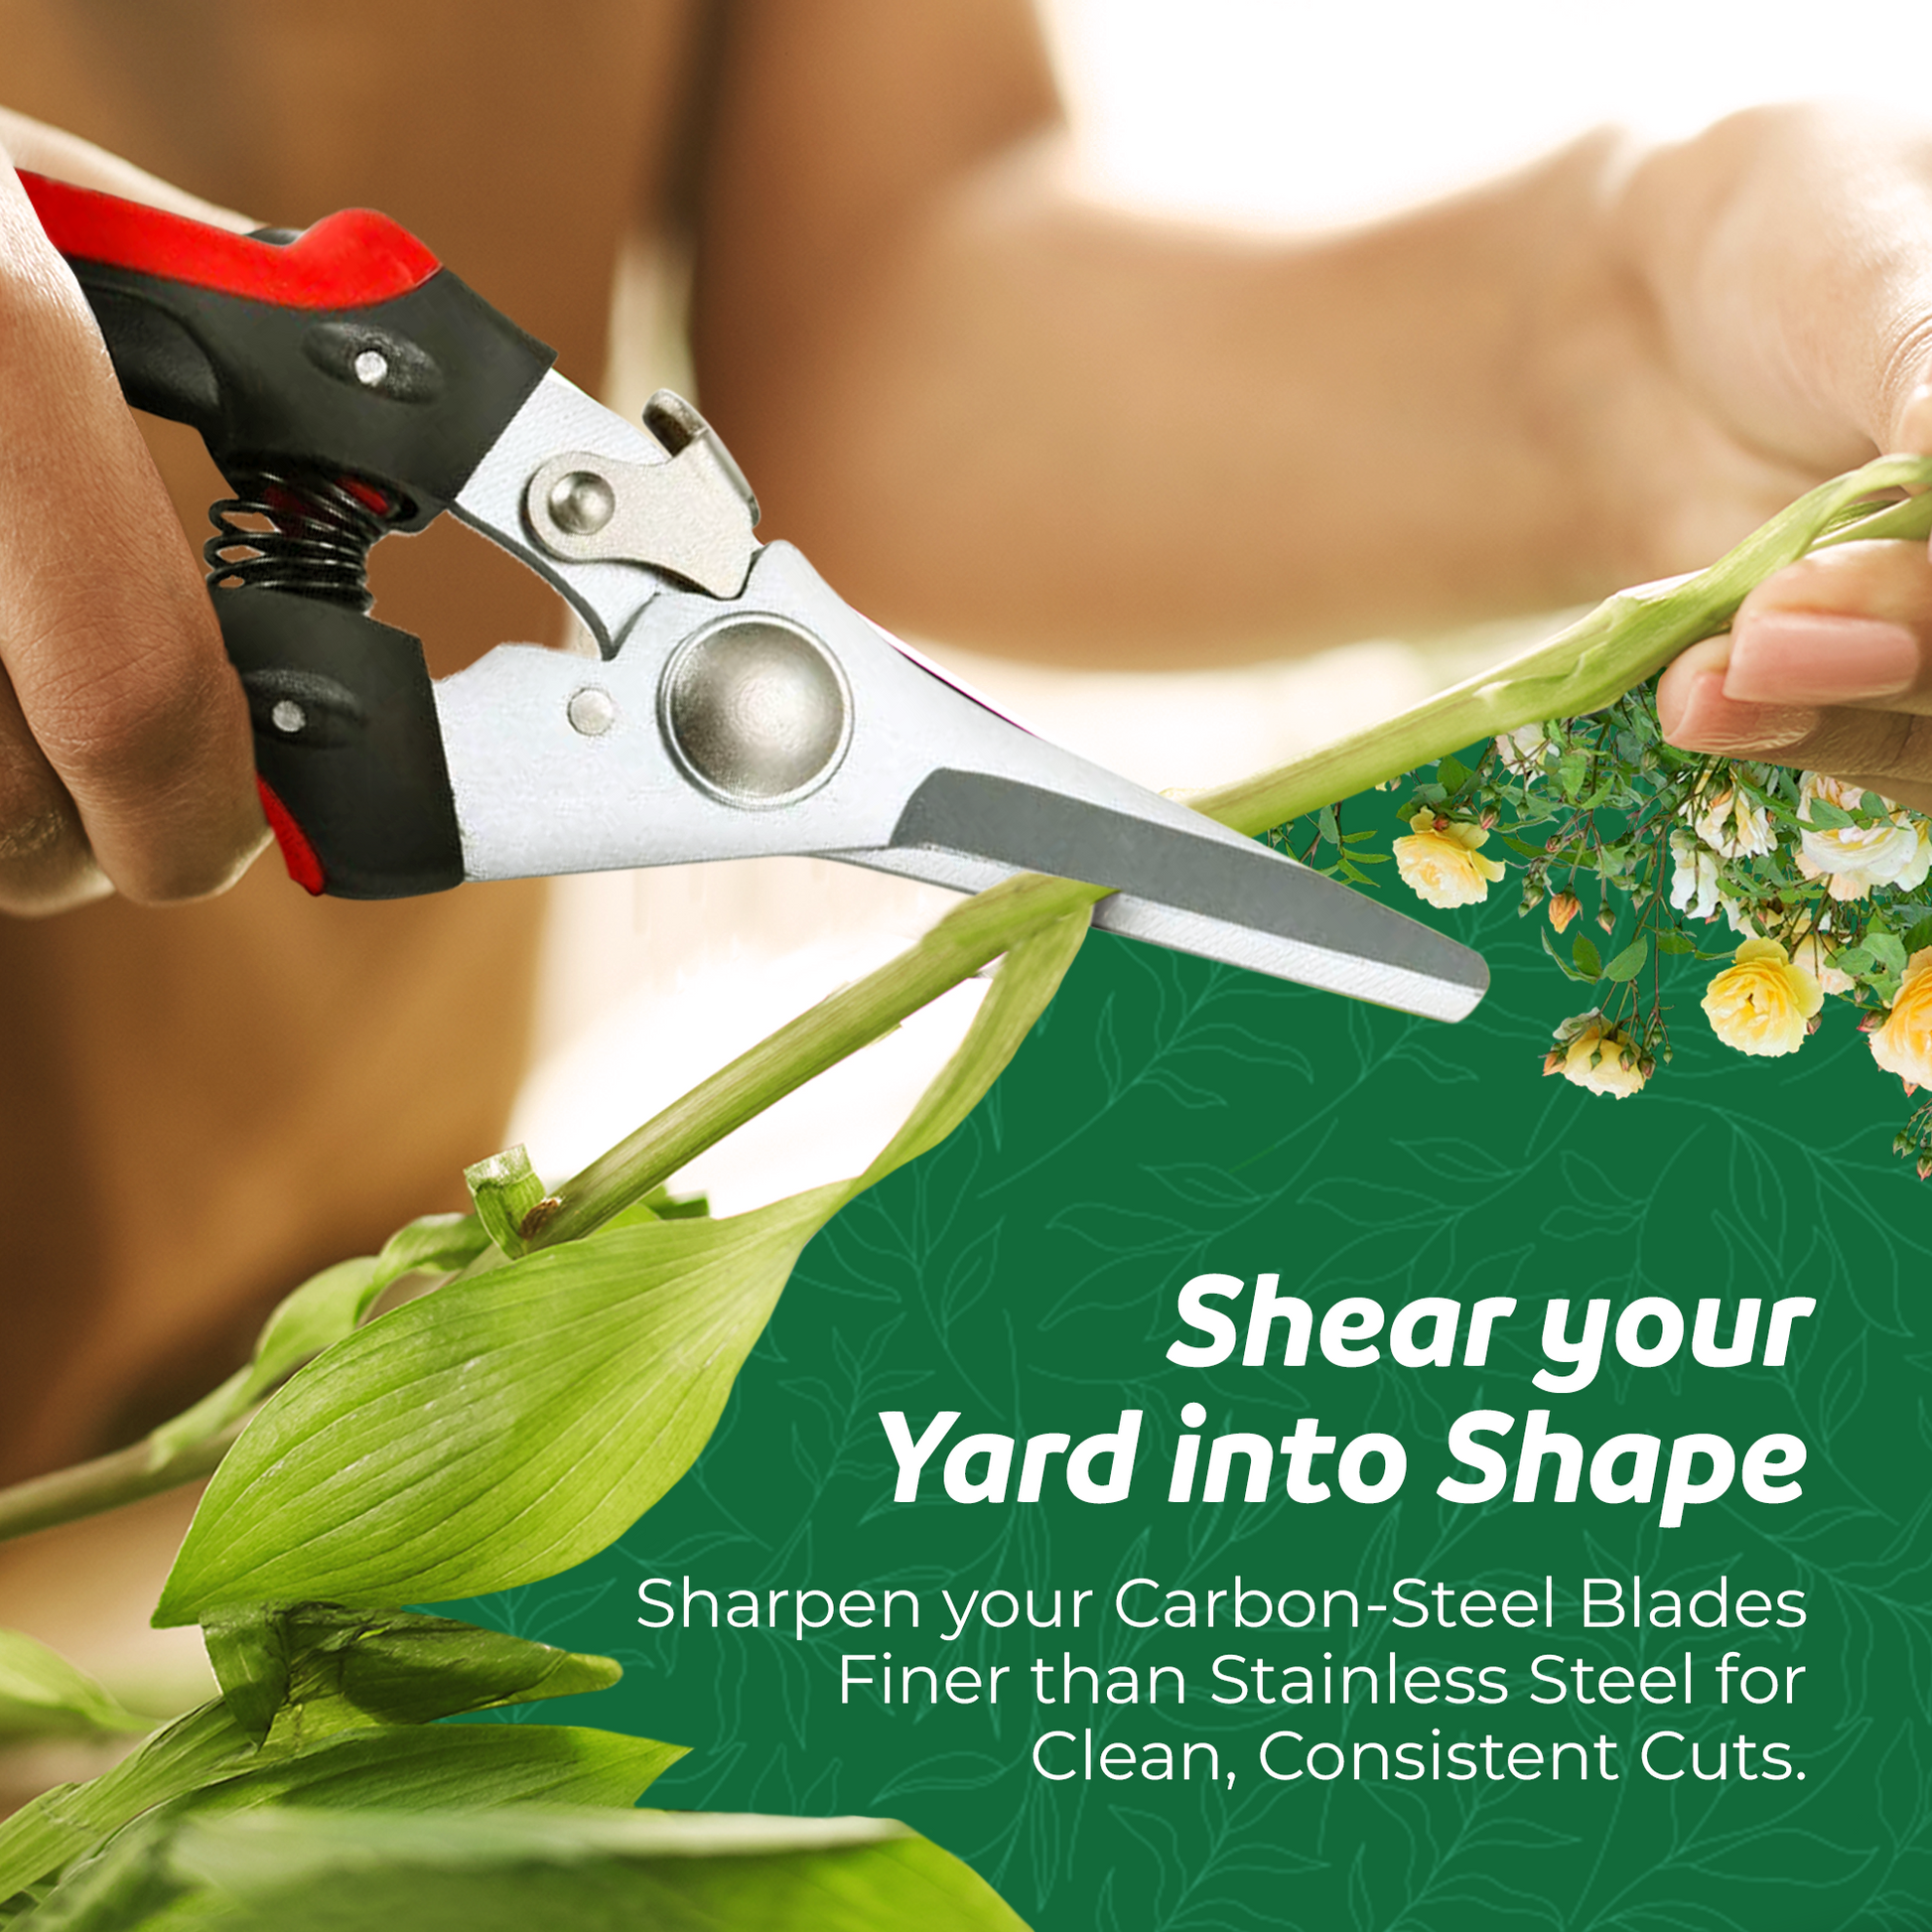 Ratchet pruning shears with an anvil design and a nonstick steel blade, ideal for gardening, by The Gardener's Friend